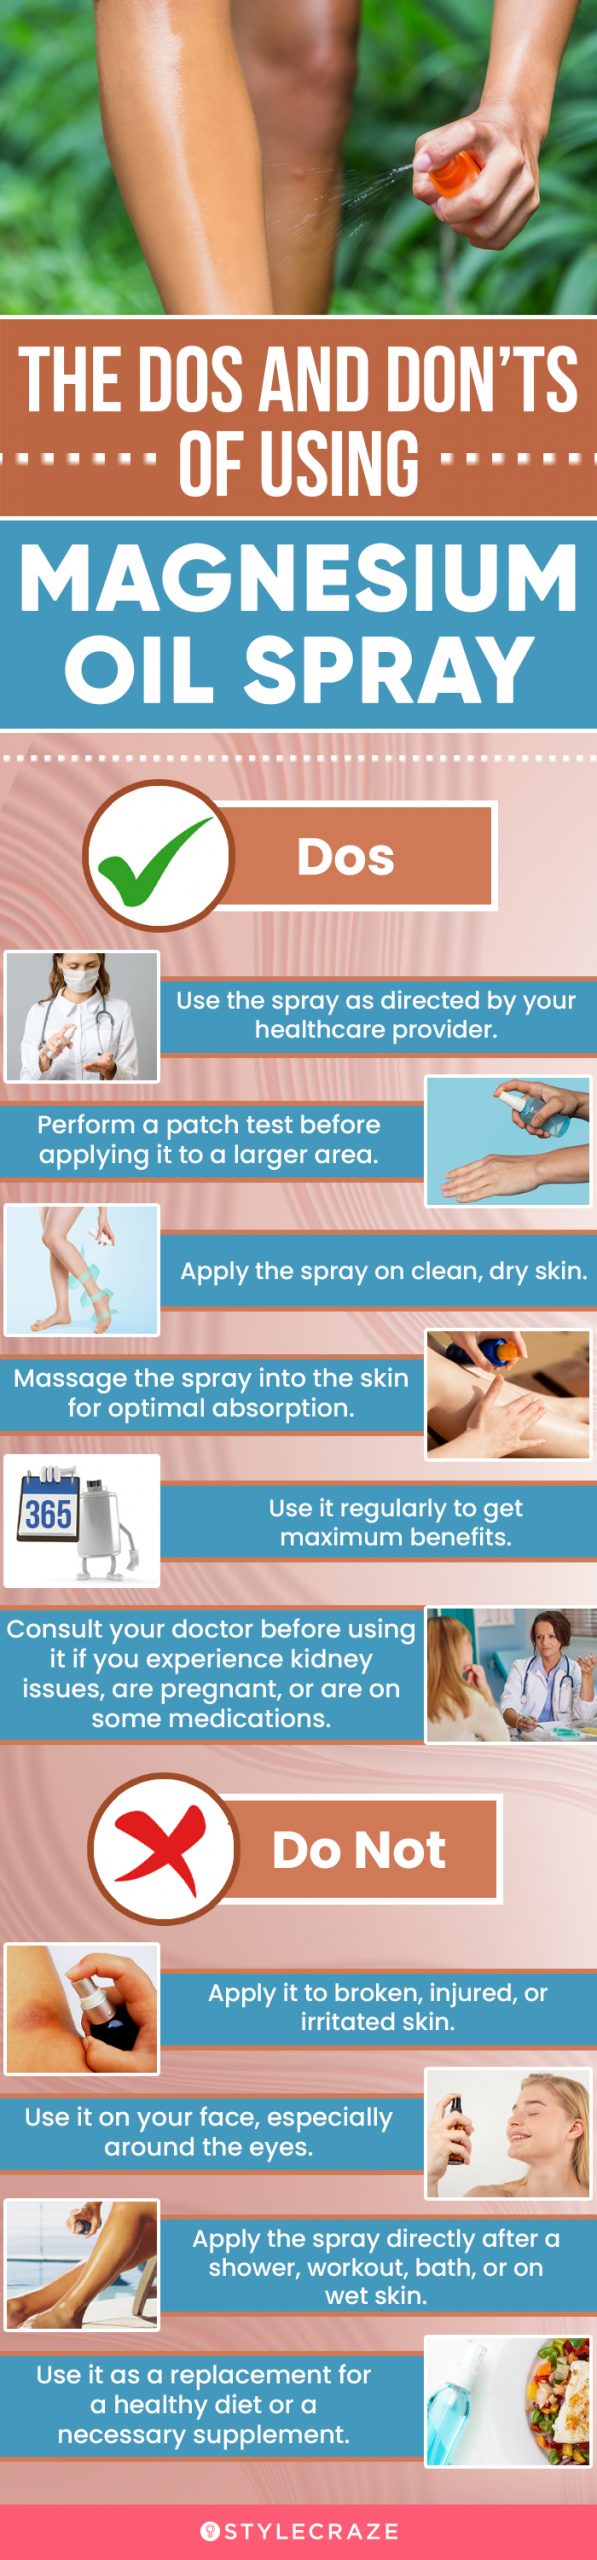 Dos And Dont's Of Magnesium Oil Spray (infographic)